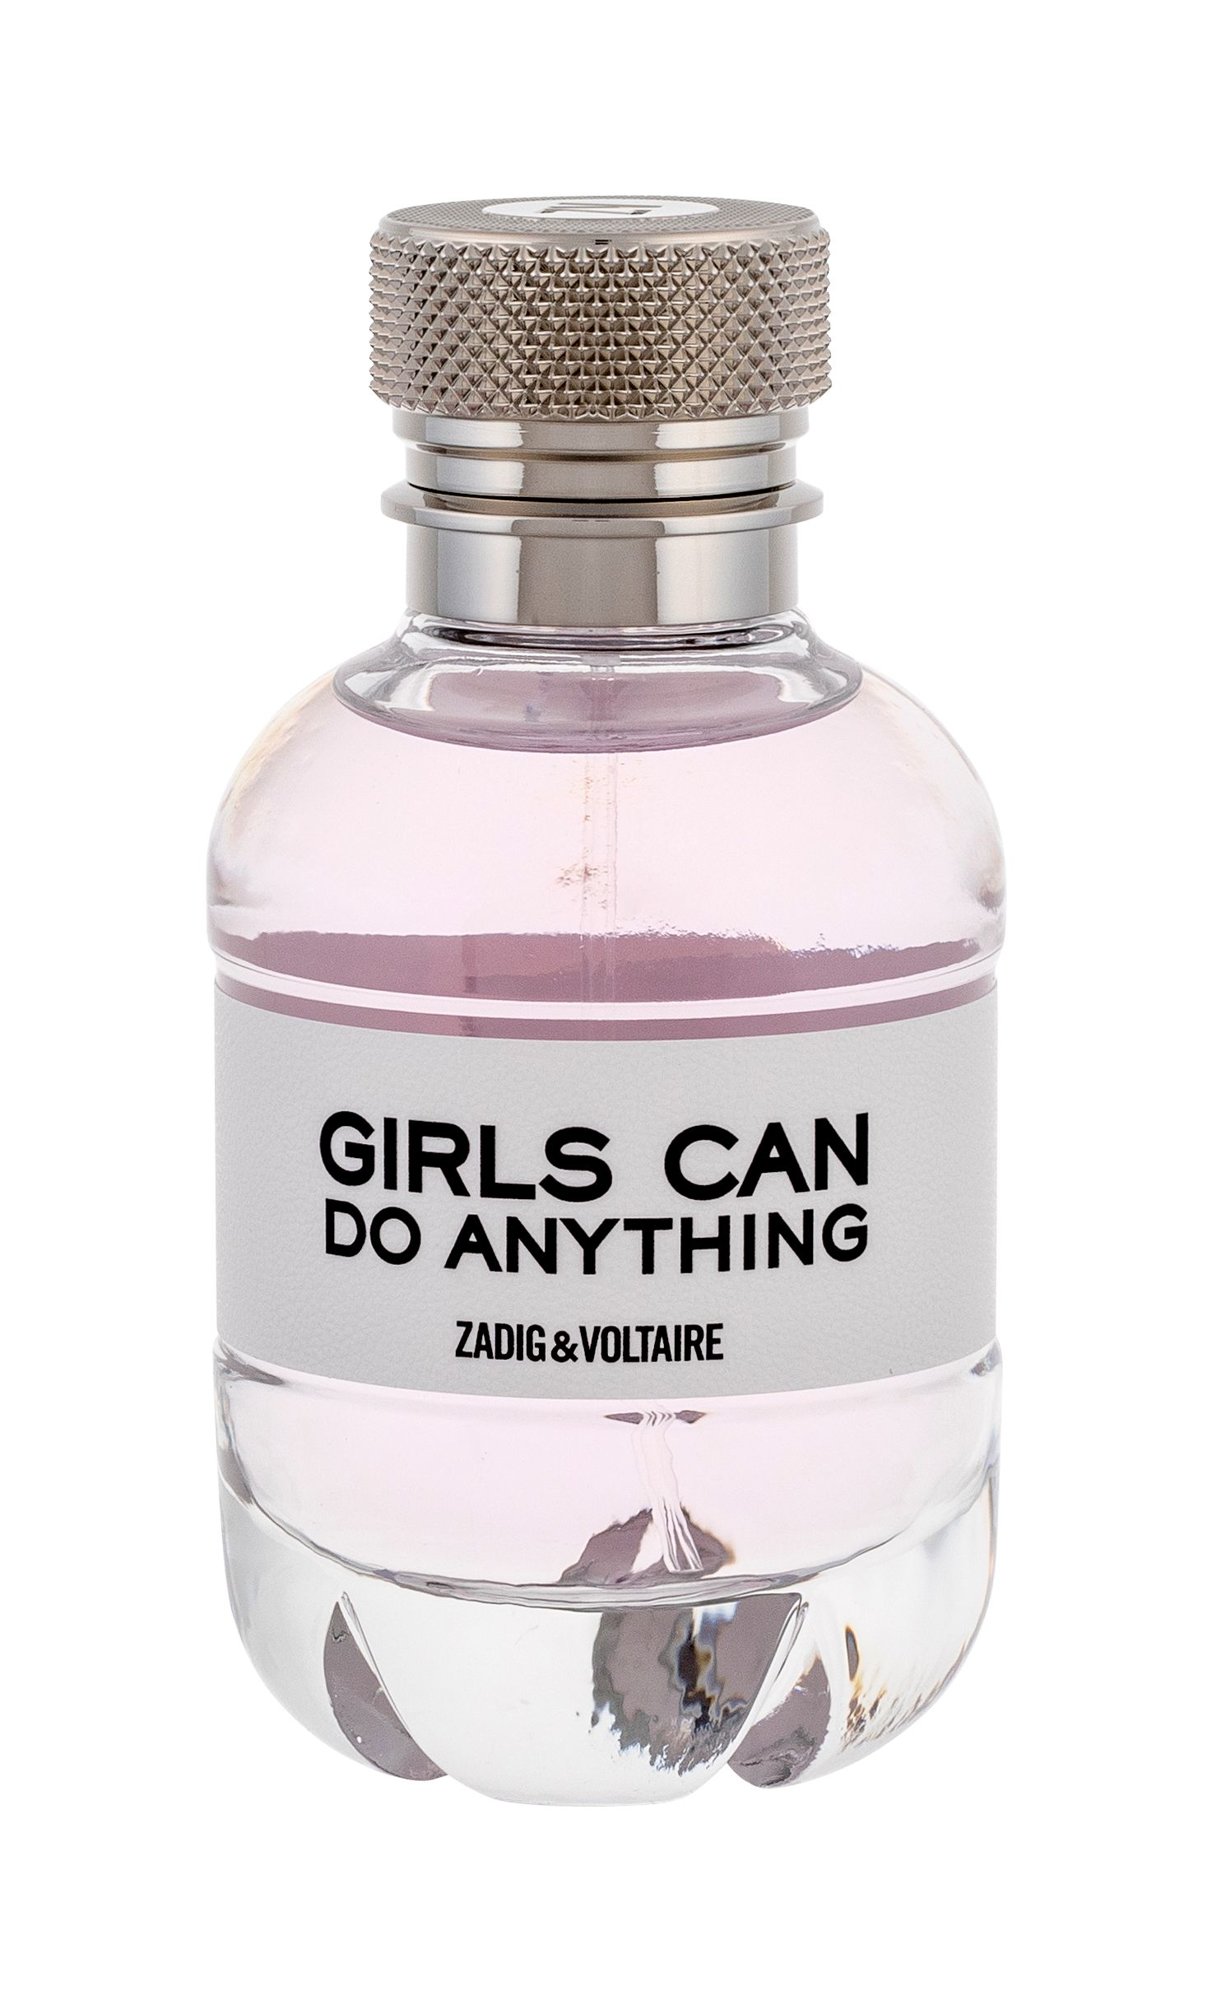 Zadig & Voltaire Girls Can Do Anything, Parfumovaná voda 30ml